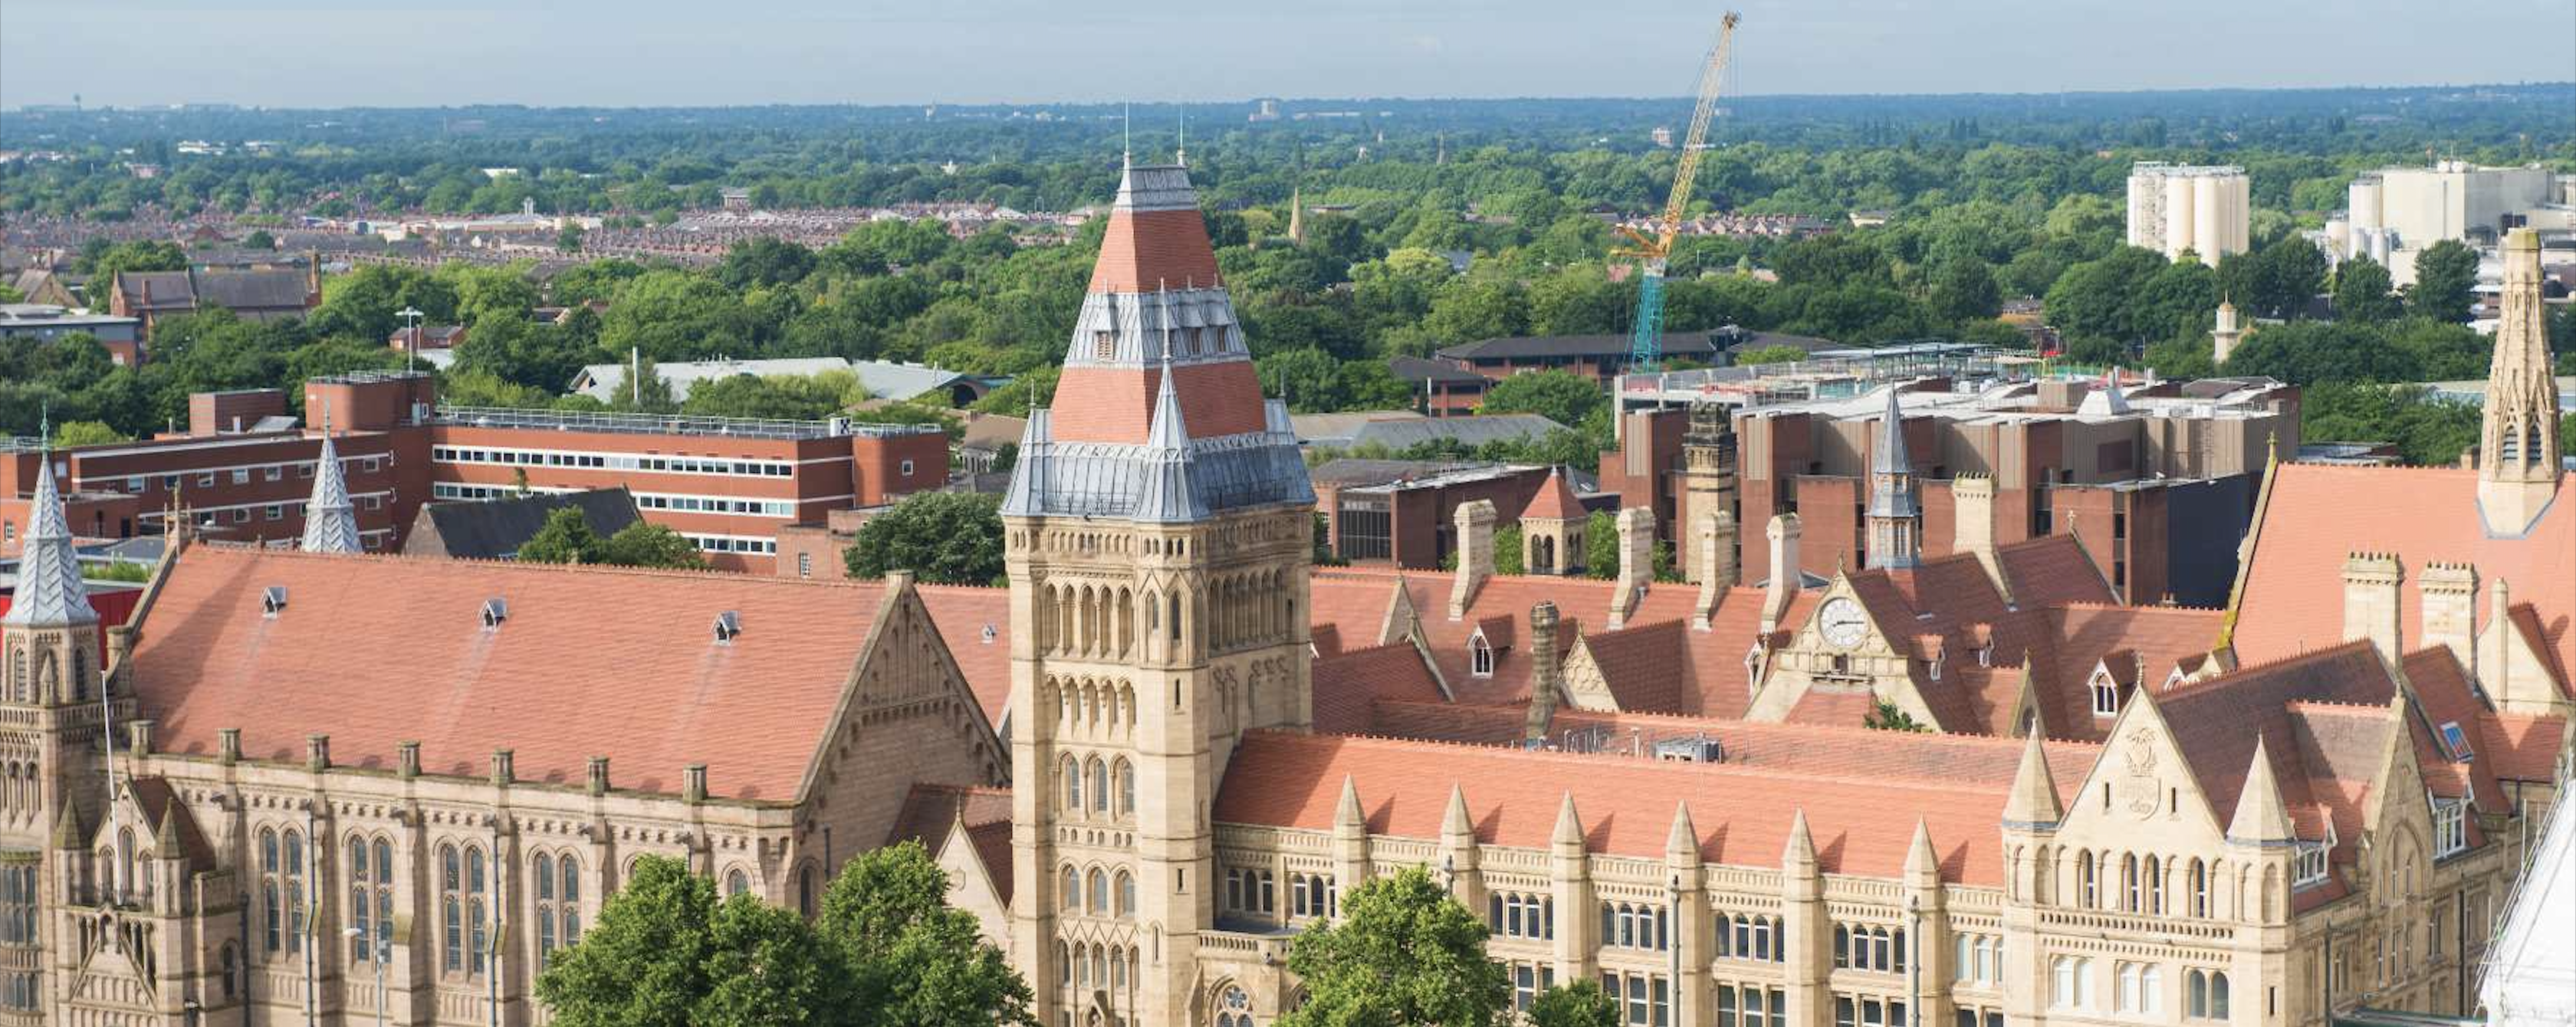 GREAT scholarships 2021 - The University of Manchester